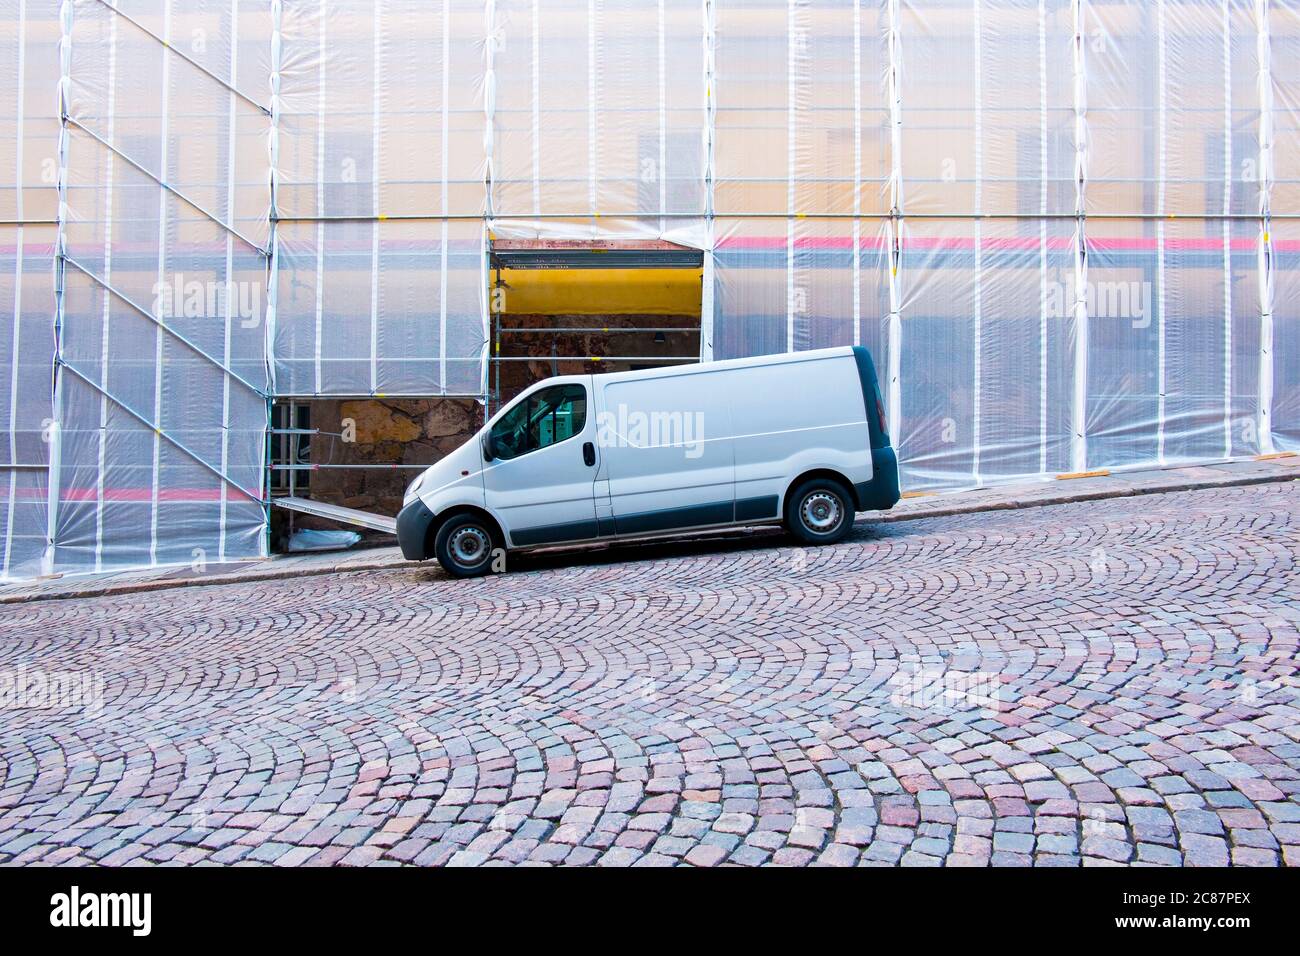 A cool, abstract, graphic look of a van parked in front of a building wrapped in construction fabric. In Helsinki, Finland. Stock Photo